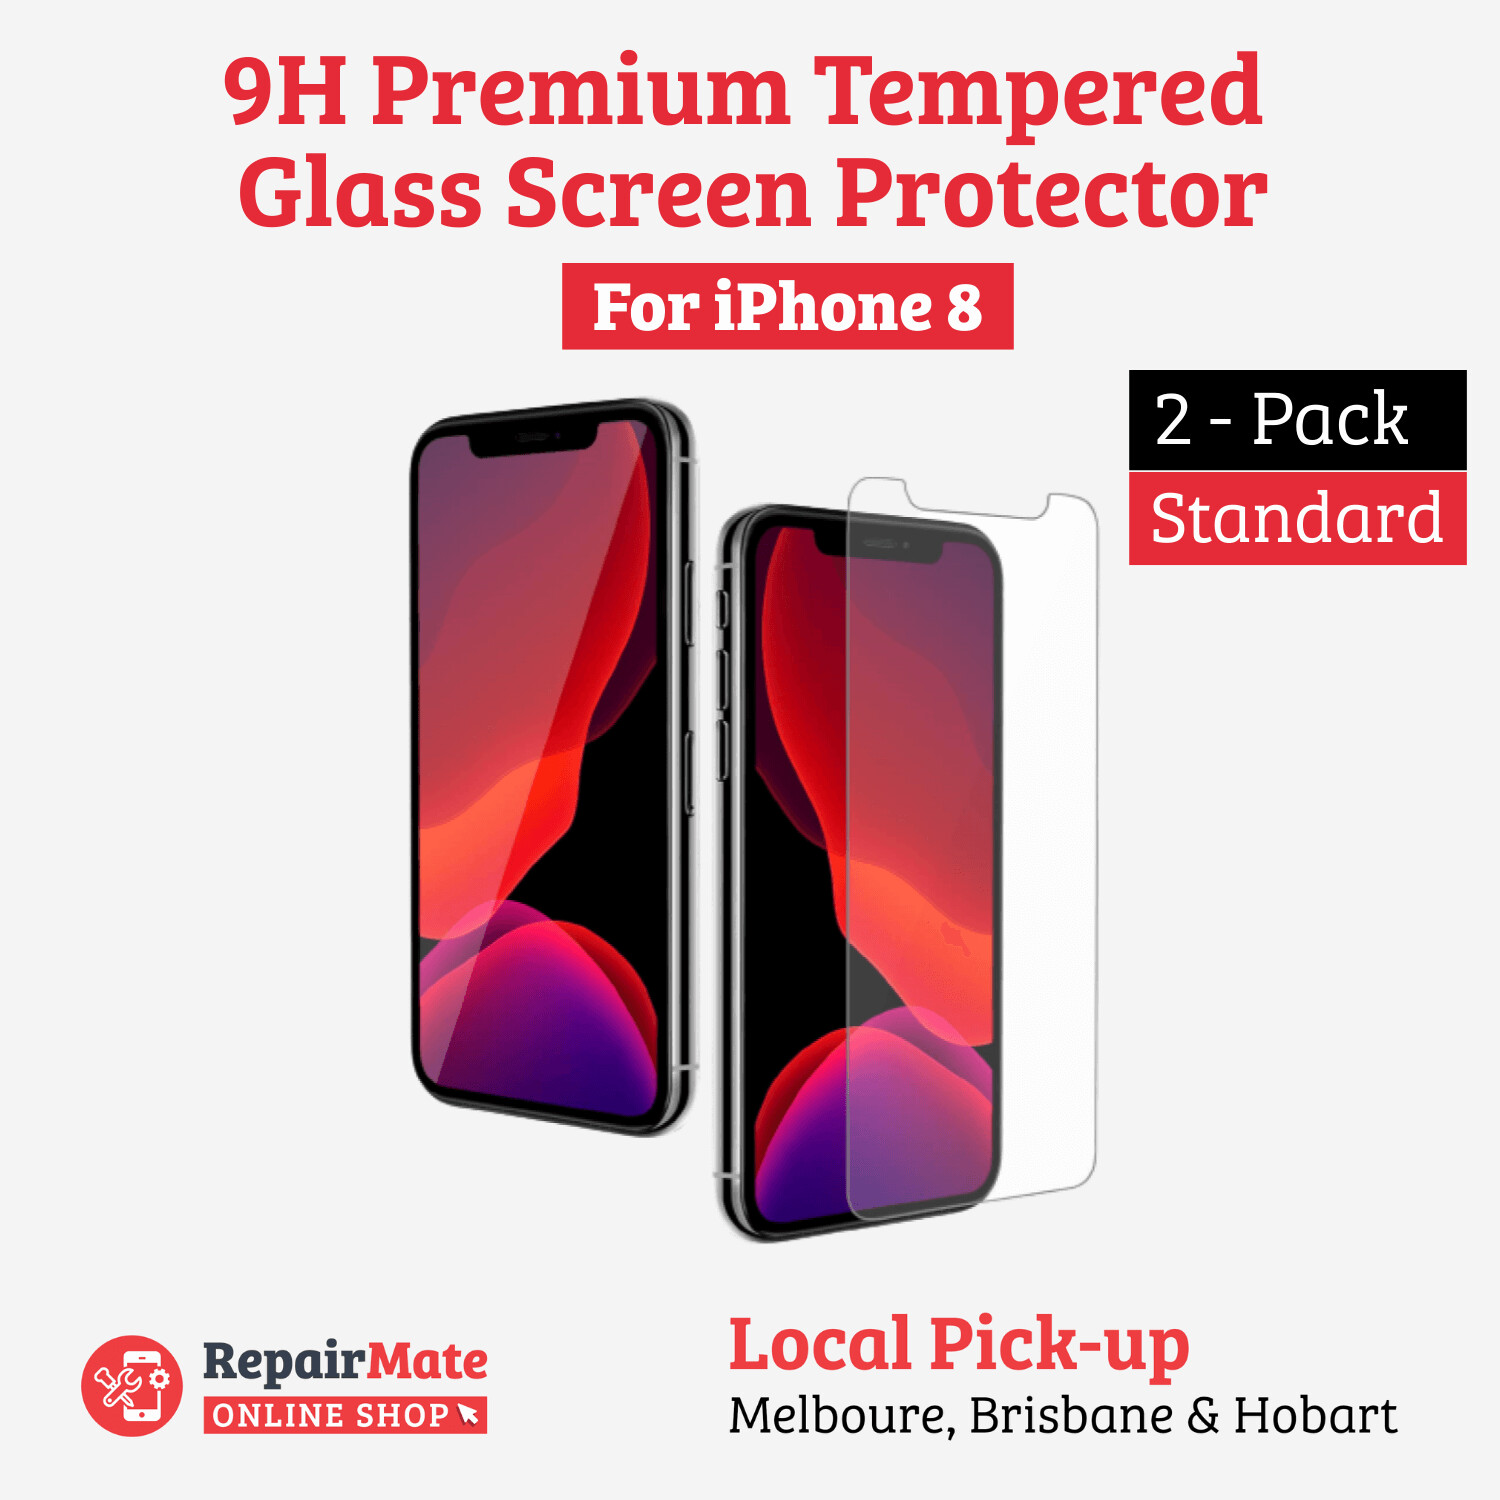 iPhone 8 9H Premium Tempered Glass Screen Protector [2 Pack]